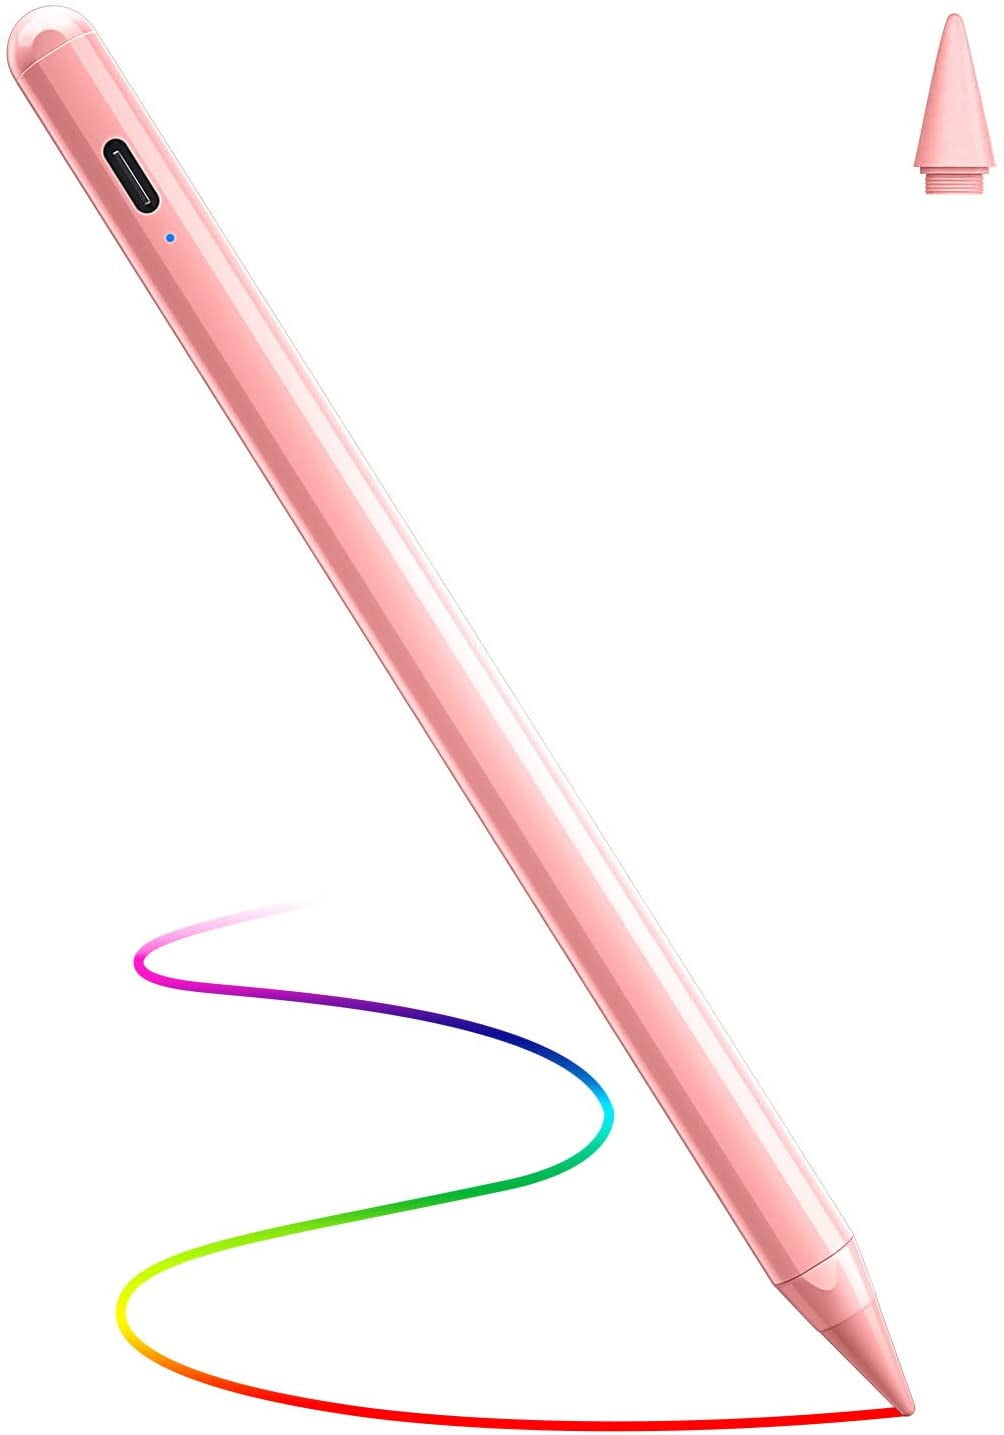 vacuüm vandaag Mantsjoerije DTTO Stylus Pen for iPad with Palm Rejection, for Precise Writing/Drawing  (Pink) - Walmart.com